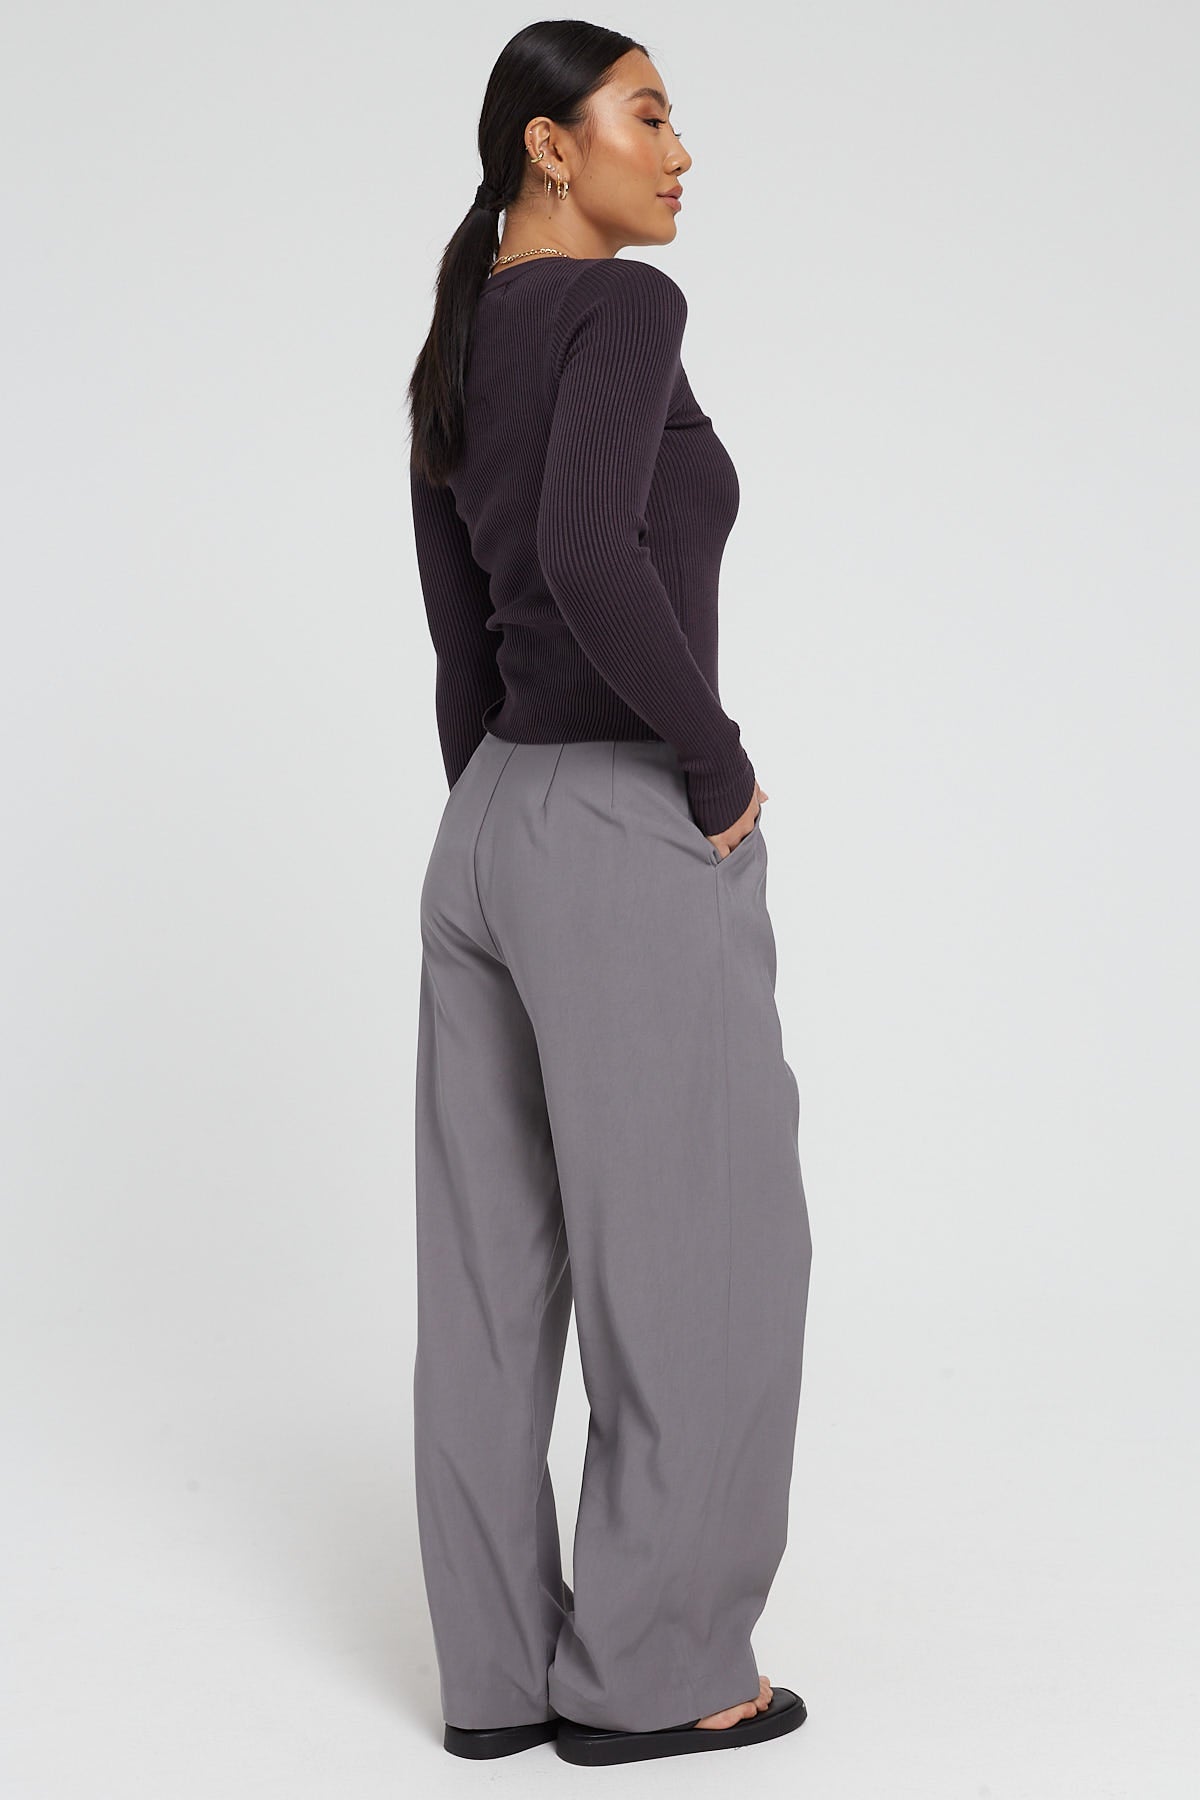 Perfect Stranger Tailored Wide Leg Petite Pant Charcoal